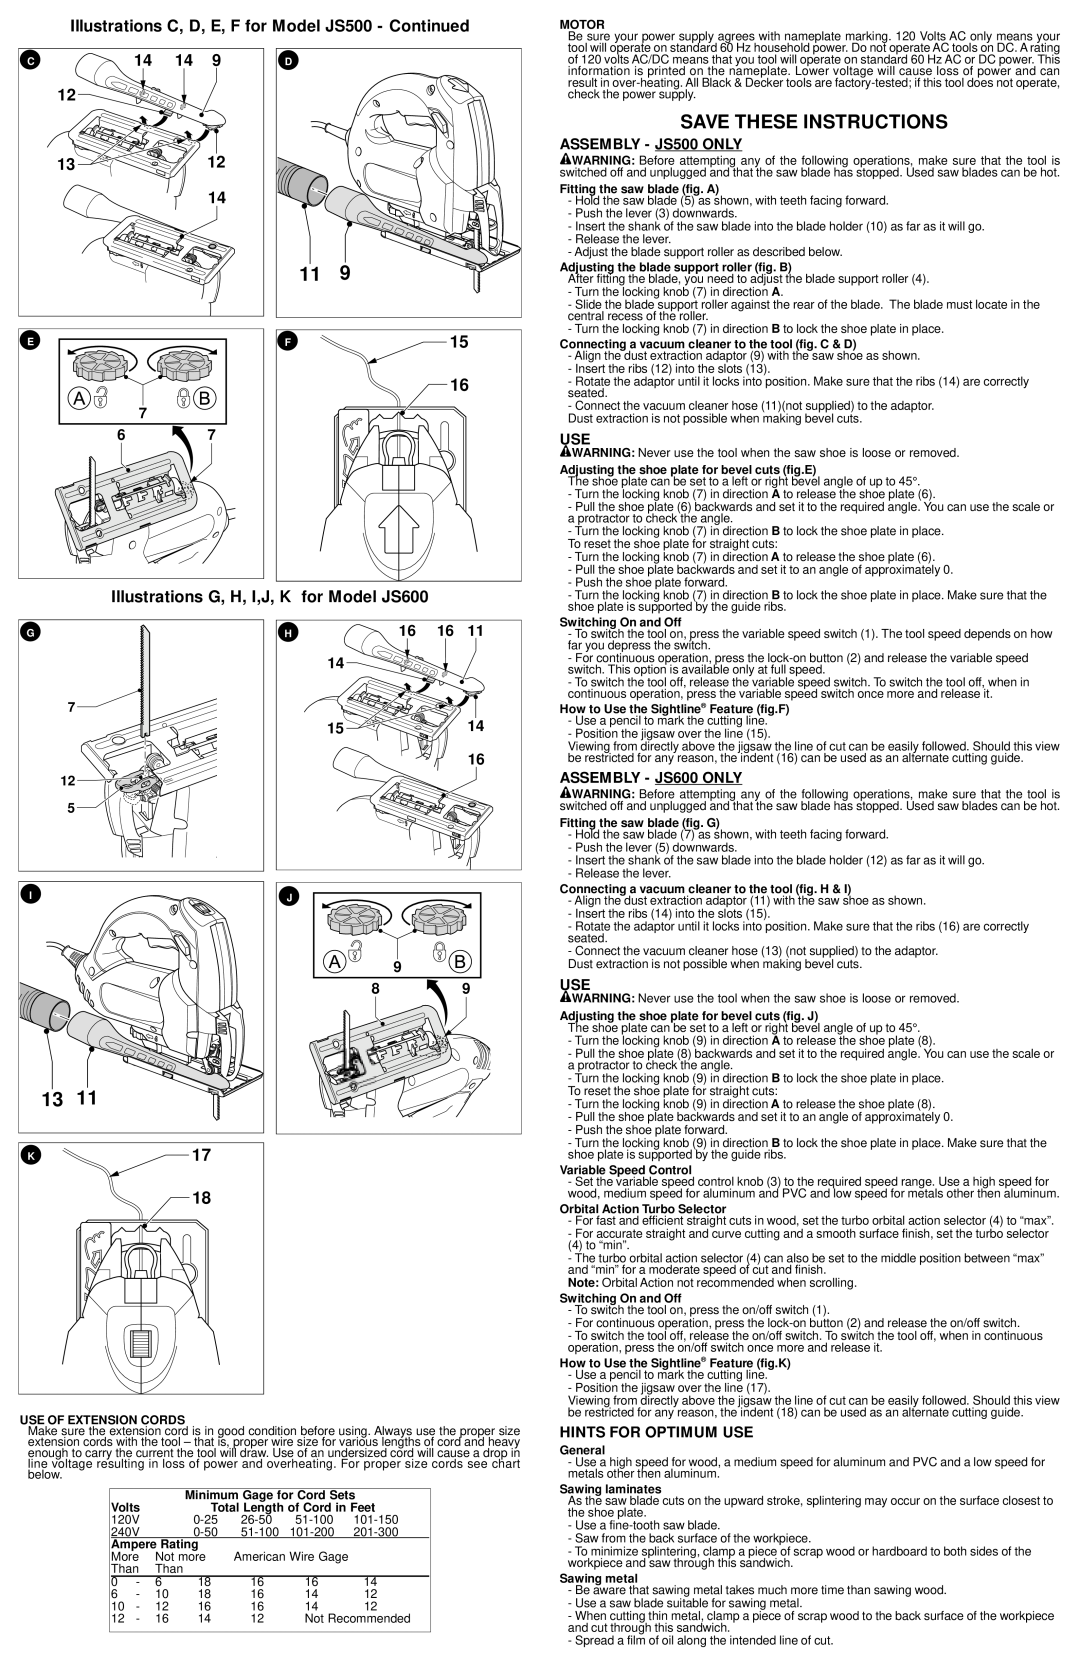 Black & Decker JS600 Save These Instructions, Illustrations C, D, E, F for Model JS500 - Continued, 14 14, 16 16 